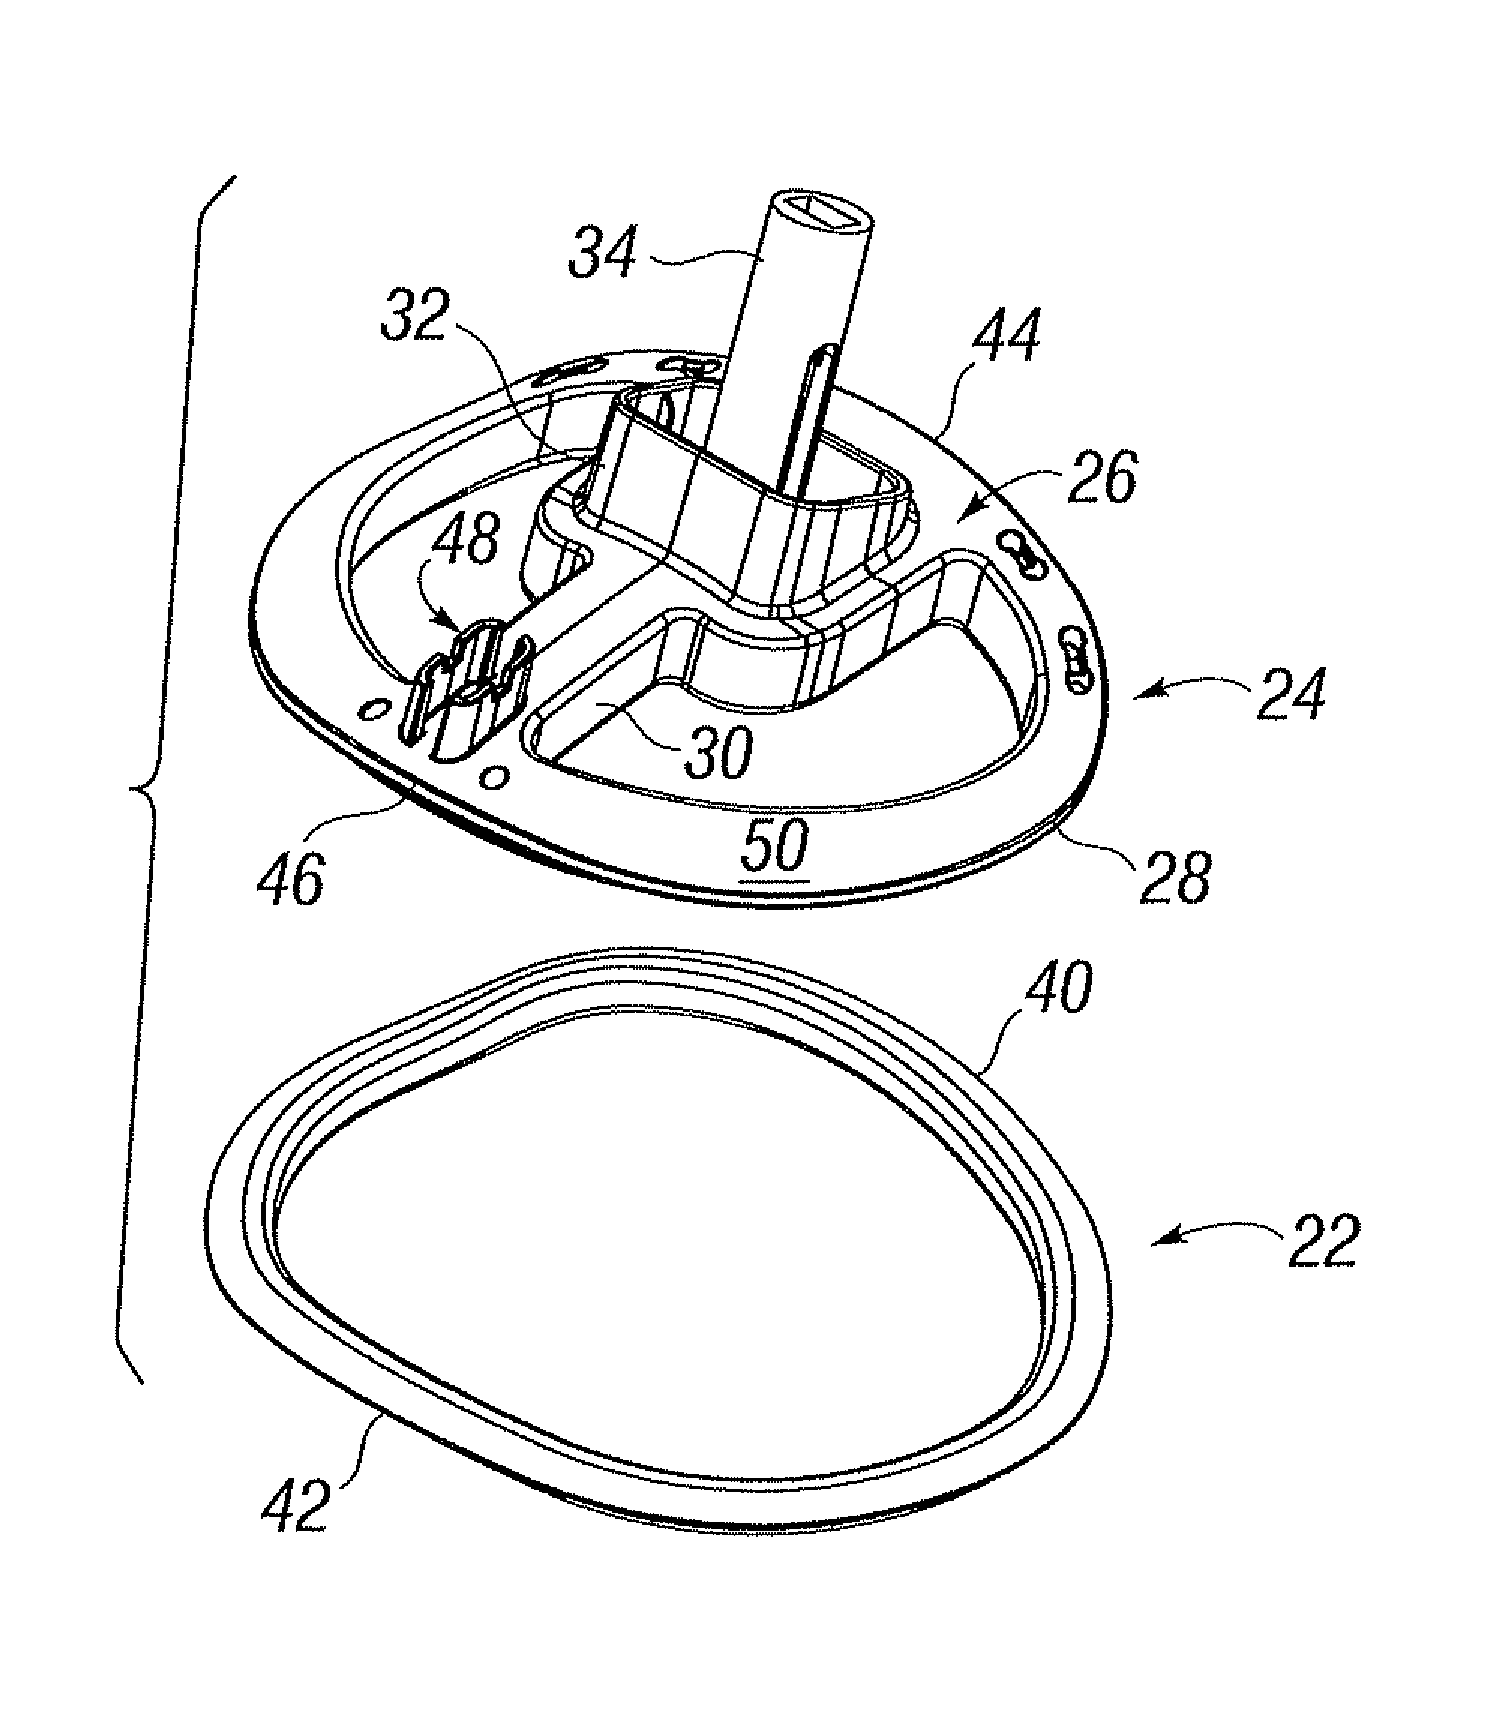 Quick-release annuloplasty ring holder